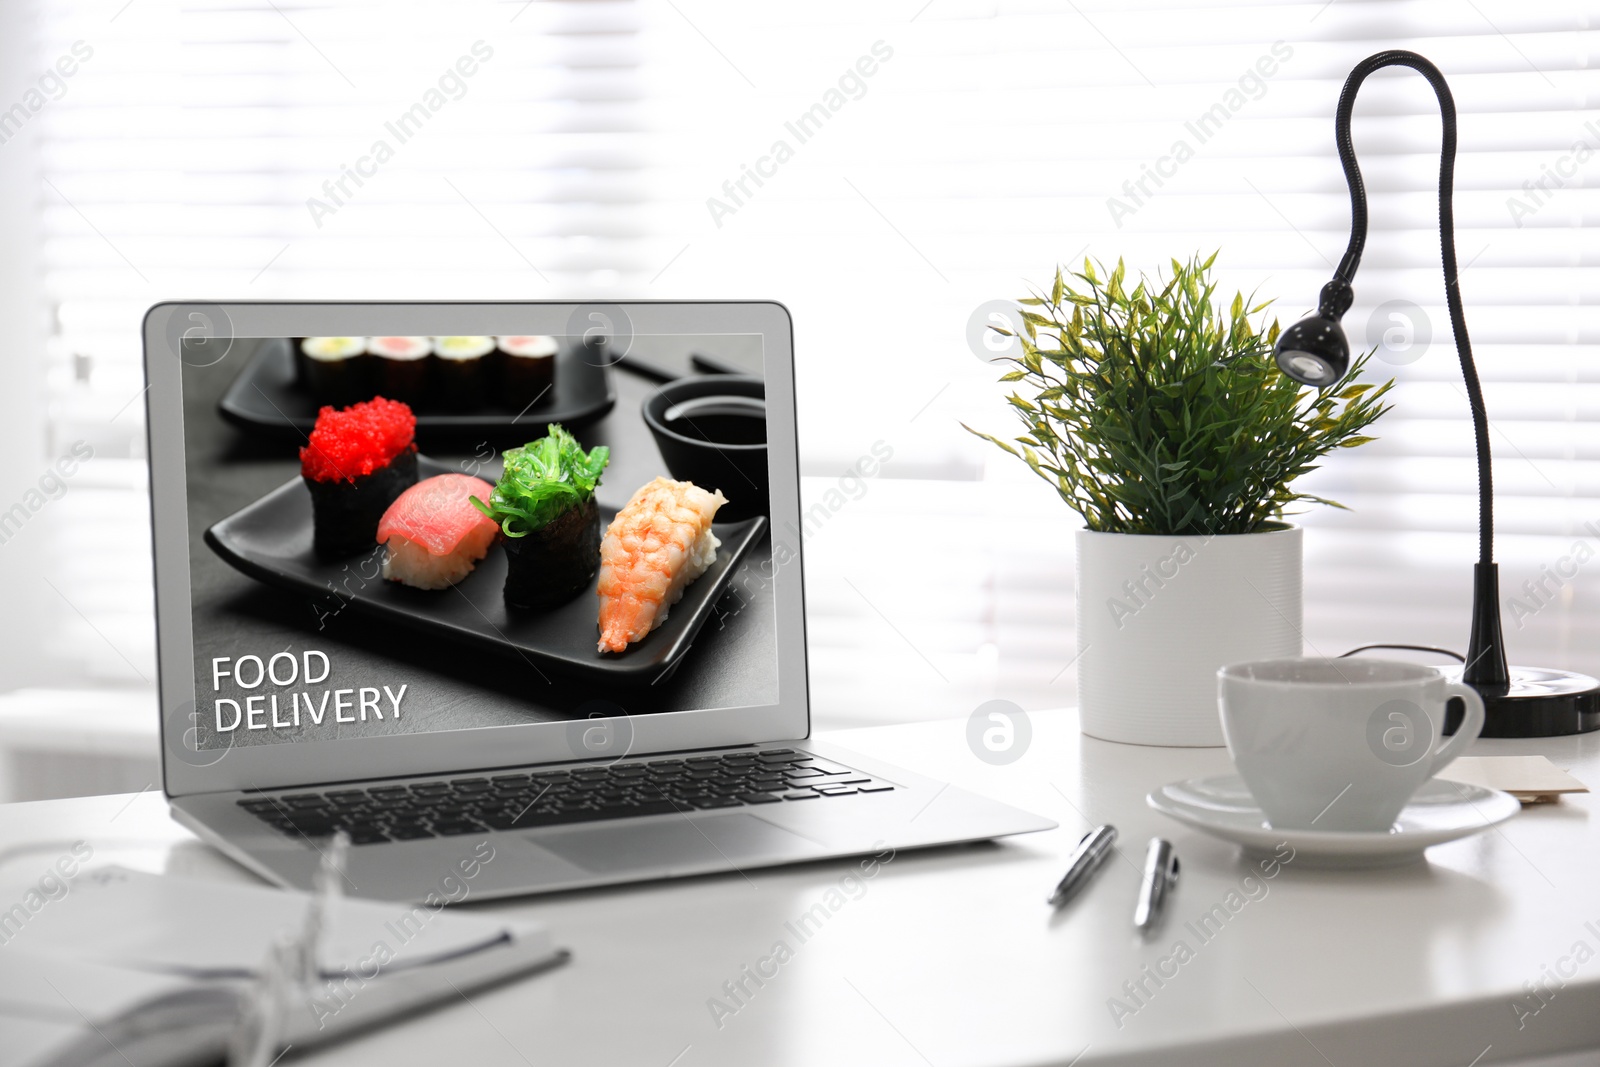 Image of Modern laptop with open page of food delivery service on screen